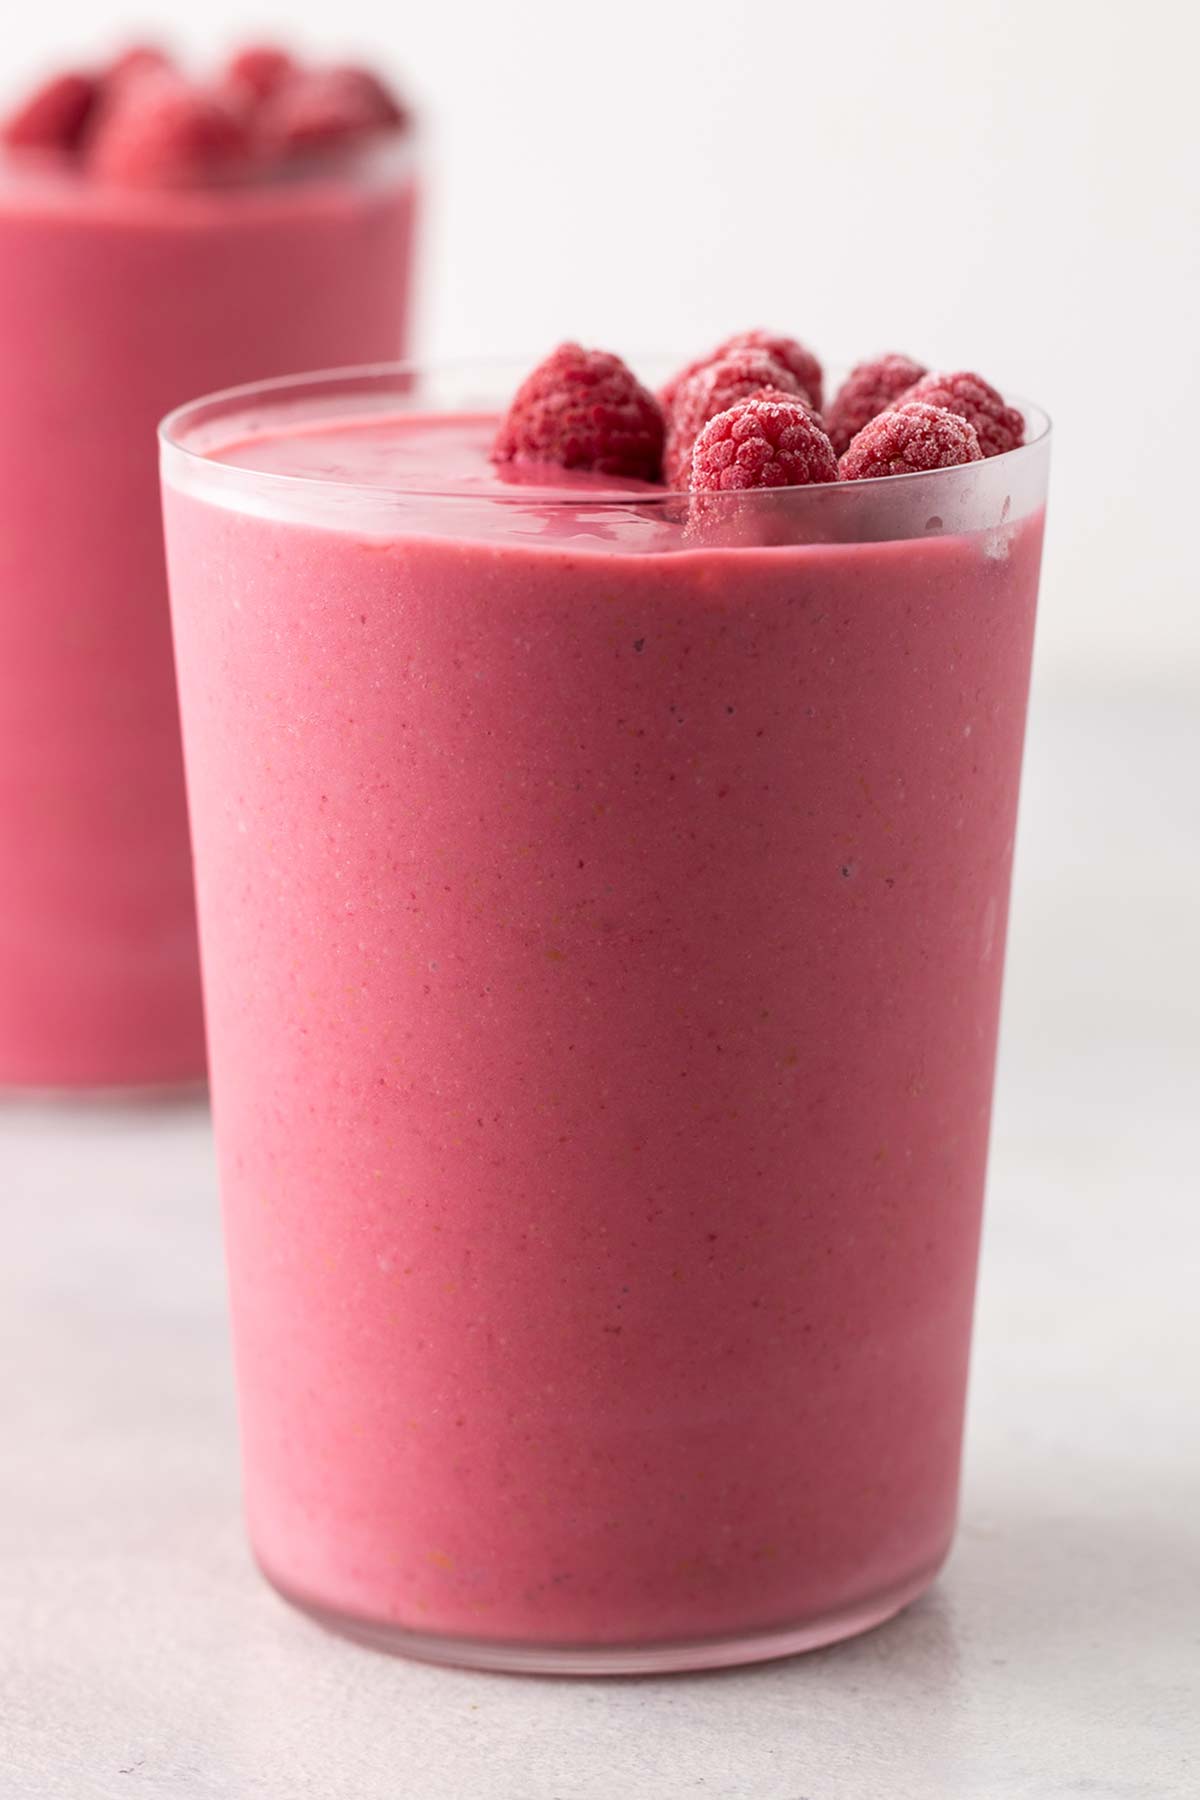 Raspberry smoothie in a glass.